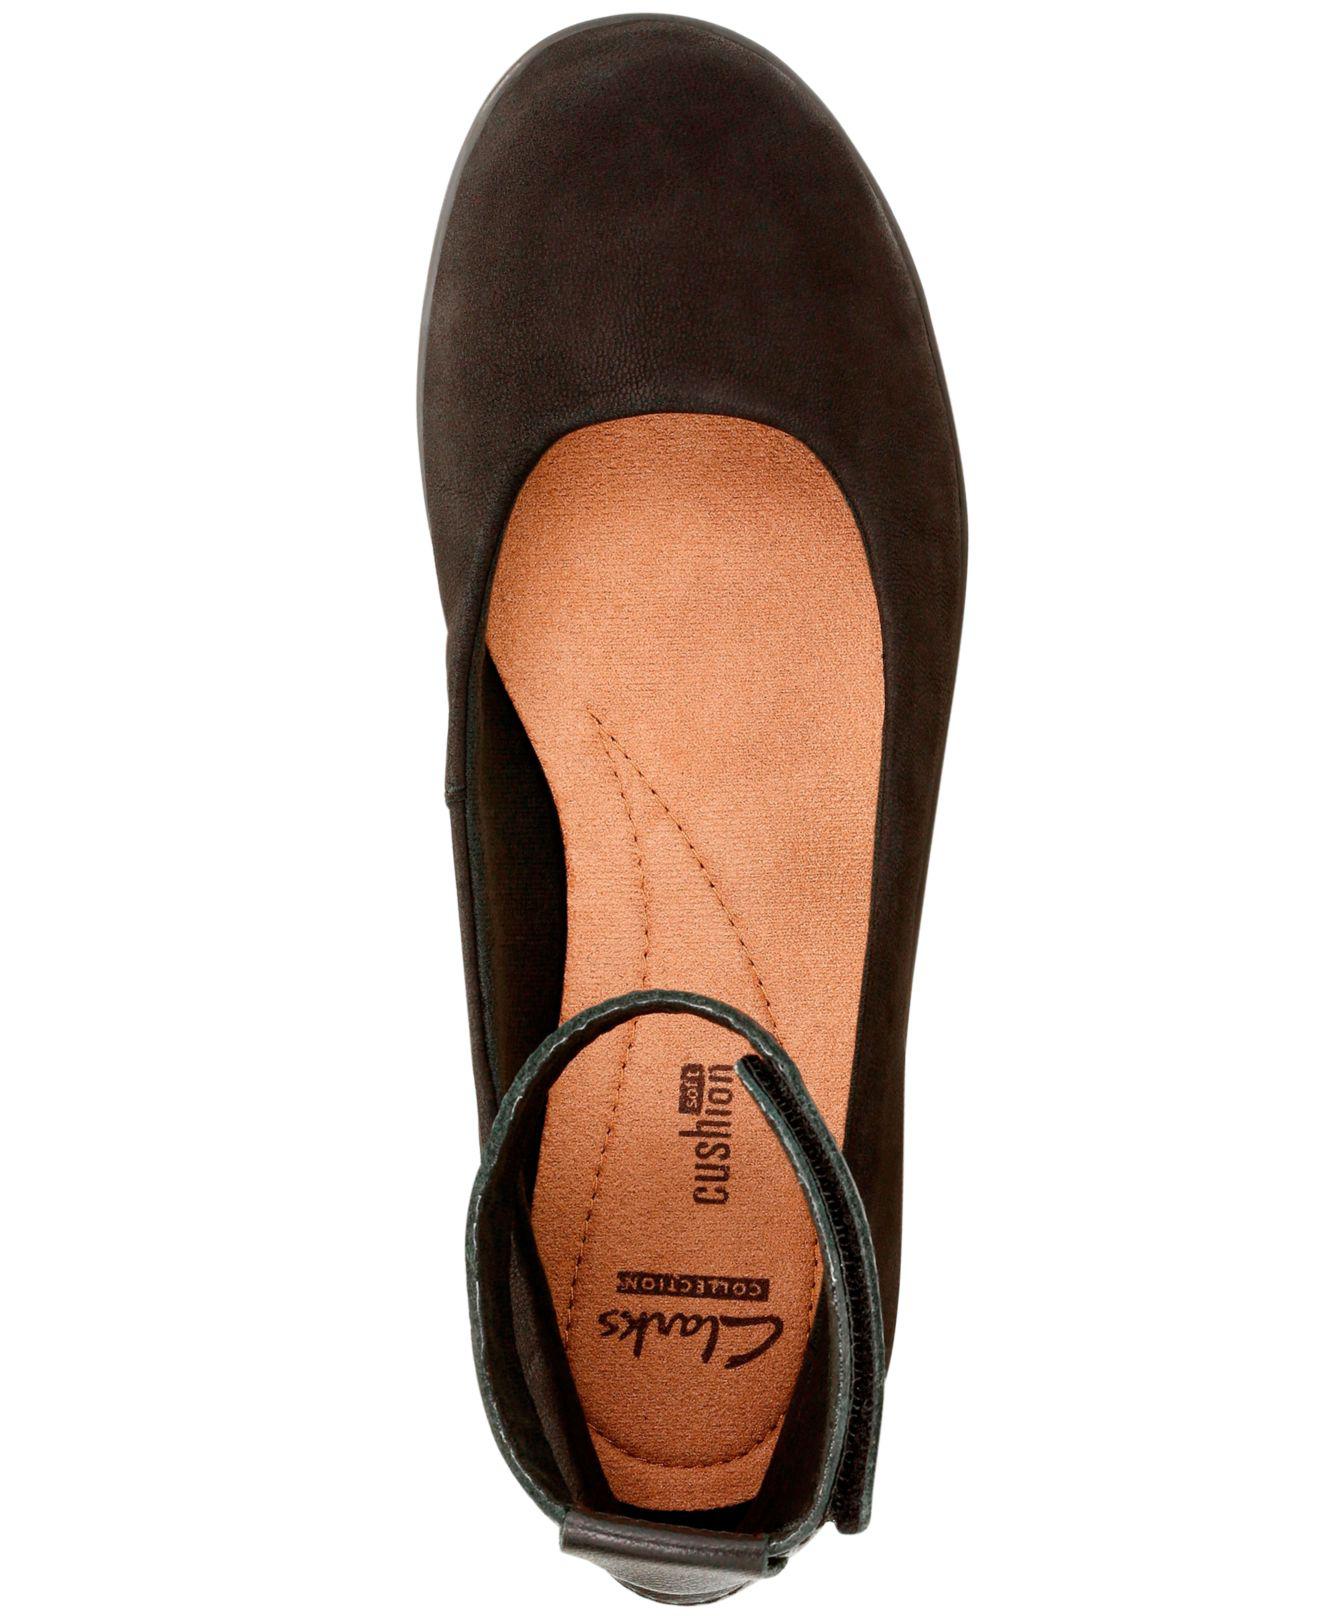 Clarks Collection Medora Mary Jane Flats in Black Lyst